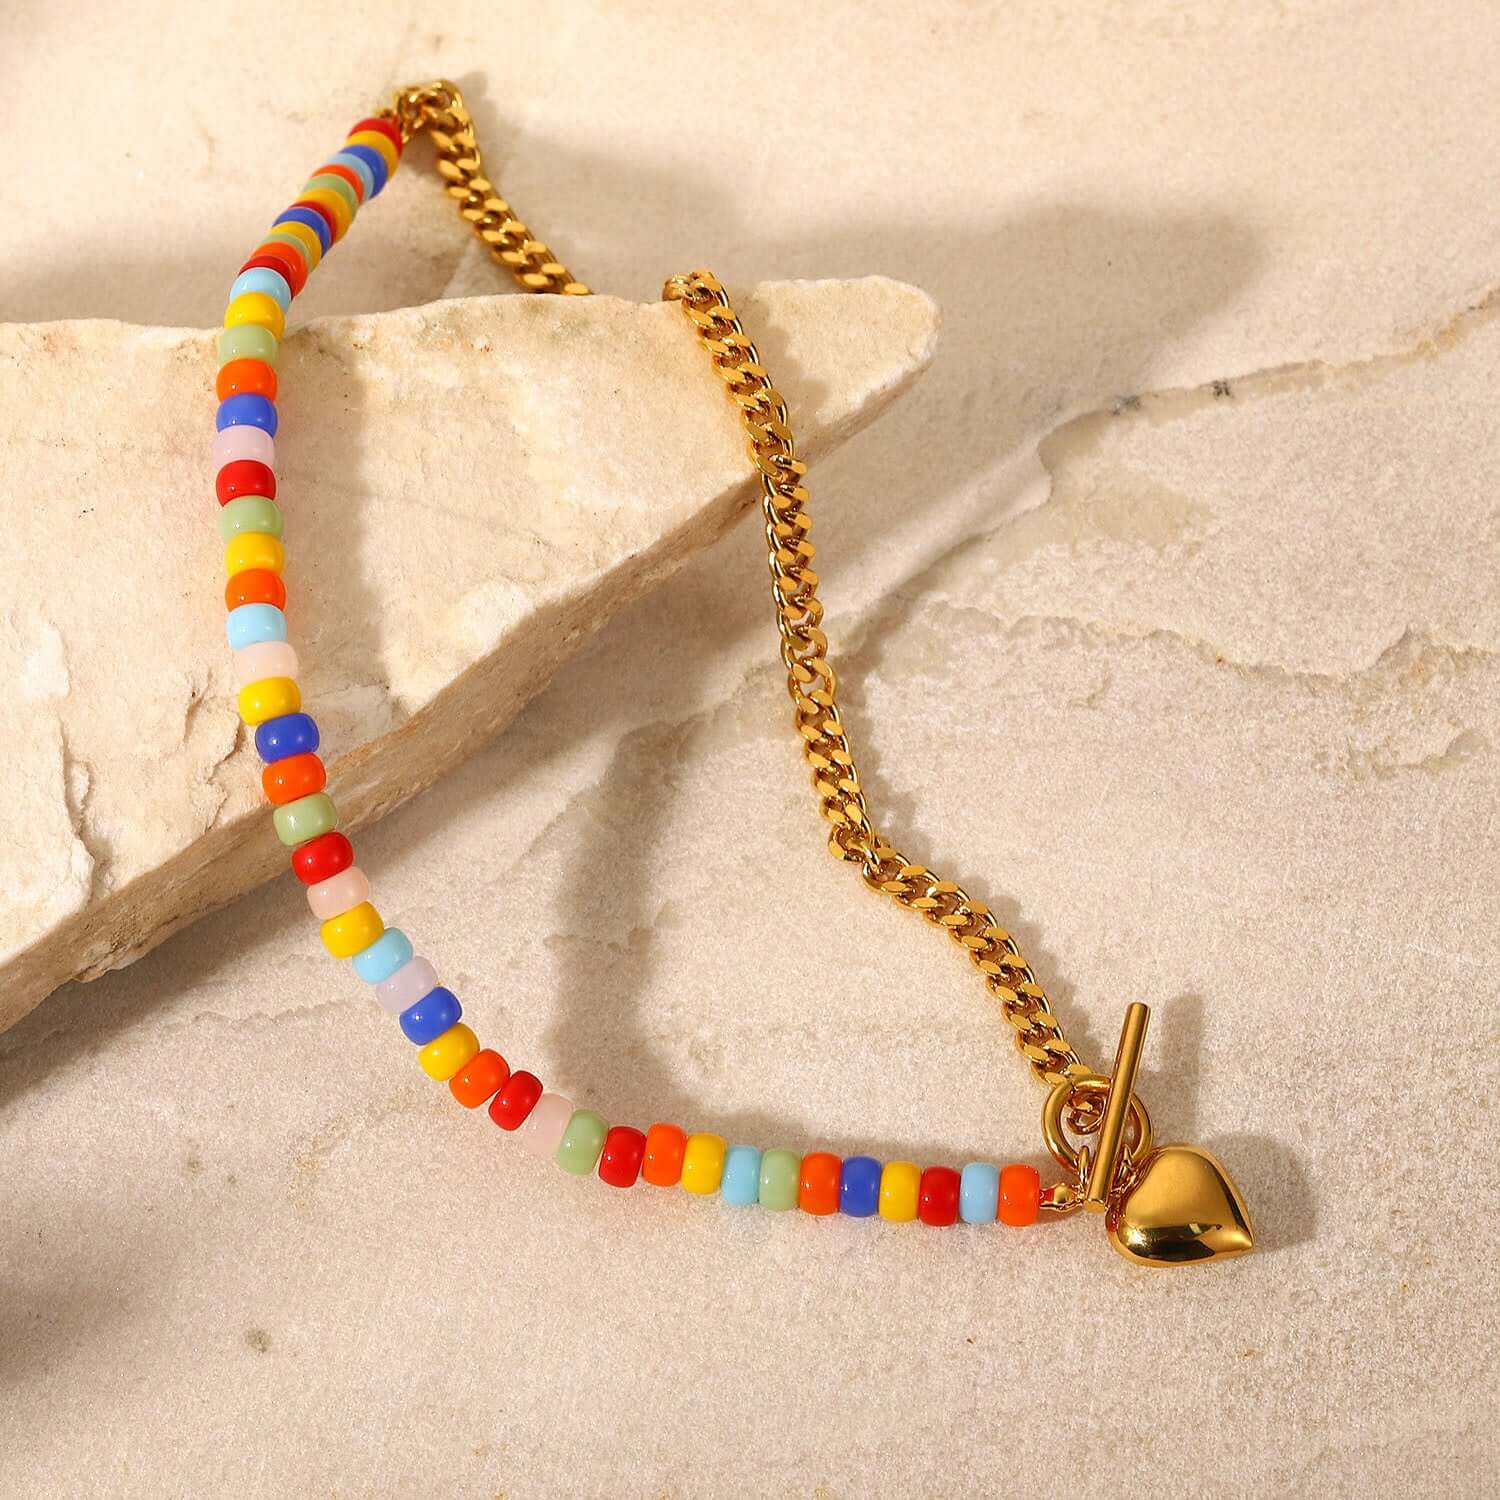 18K Gold Plated Heart Chain Necklace with Coloful Boho Ceramic Beads